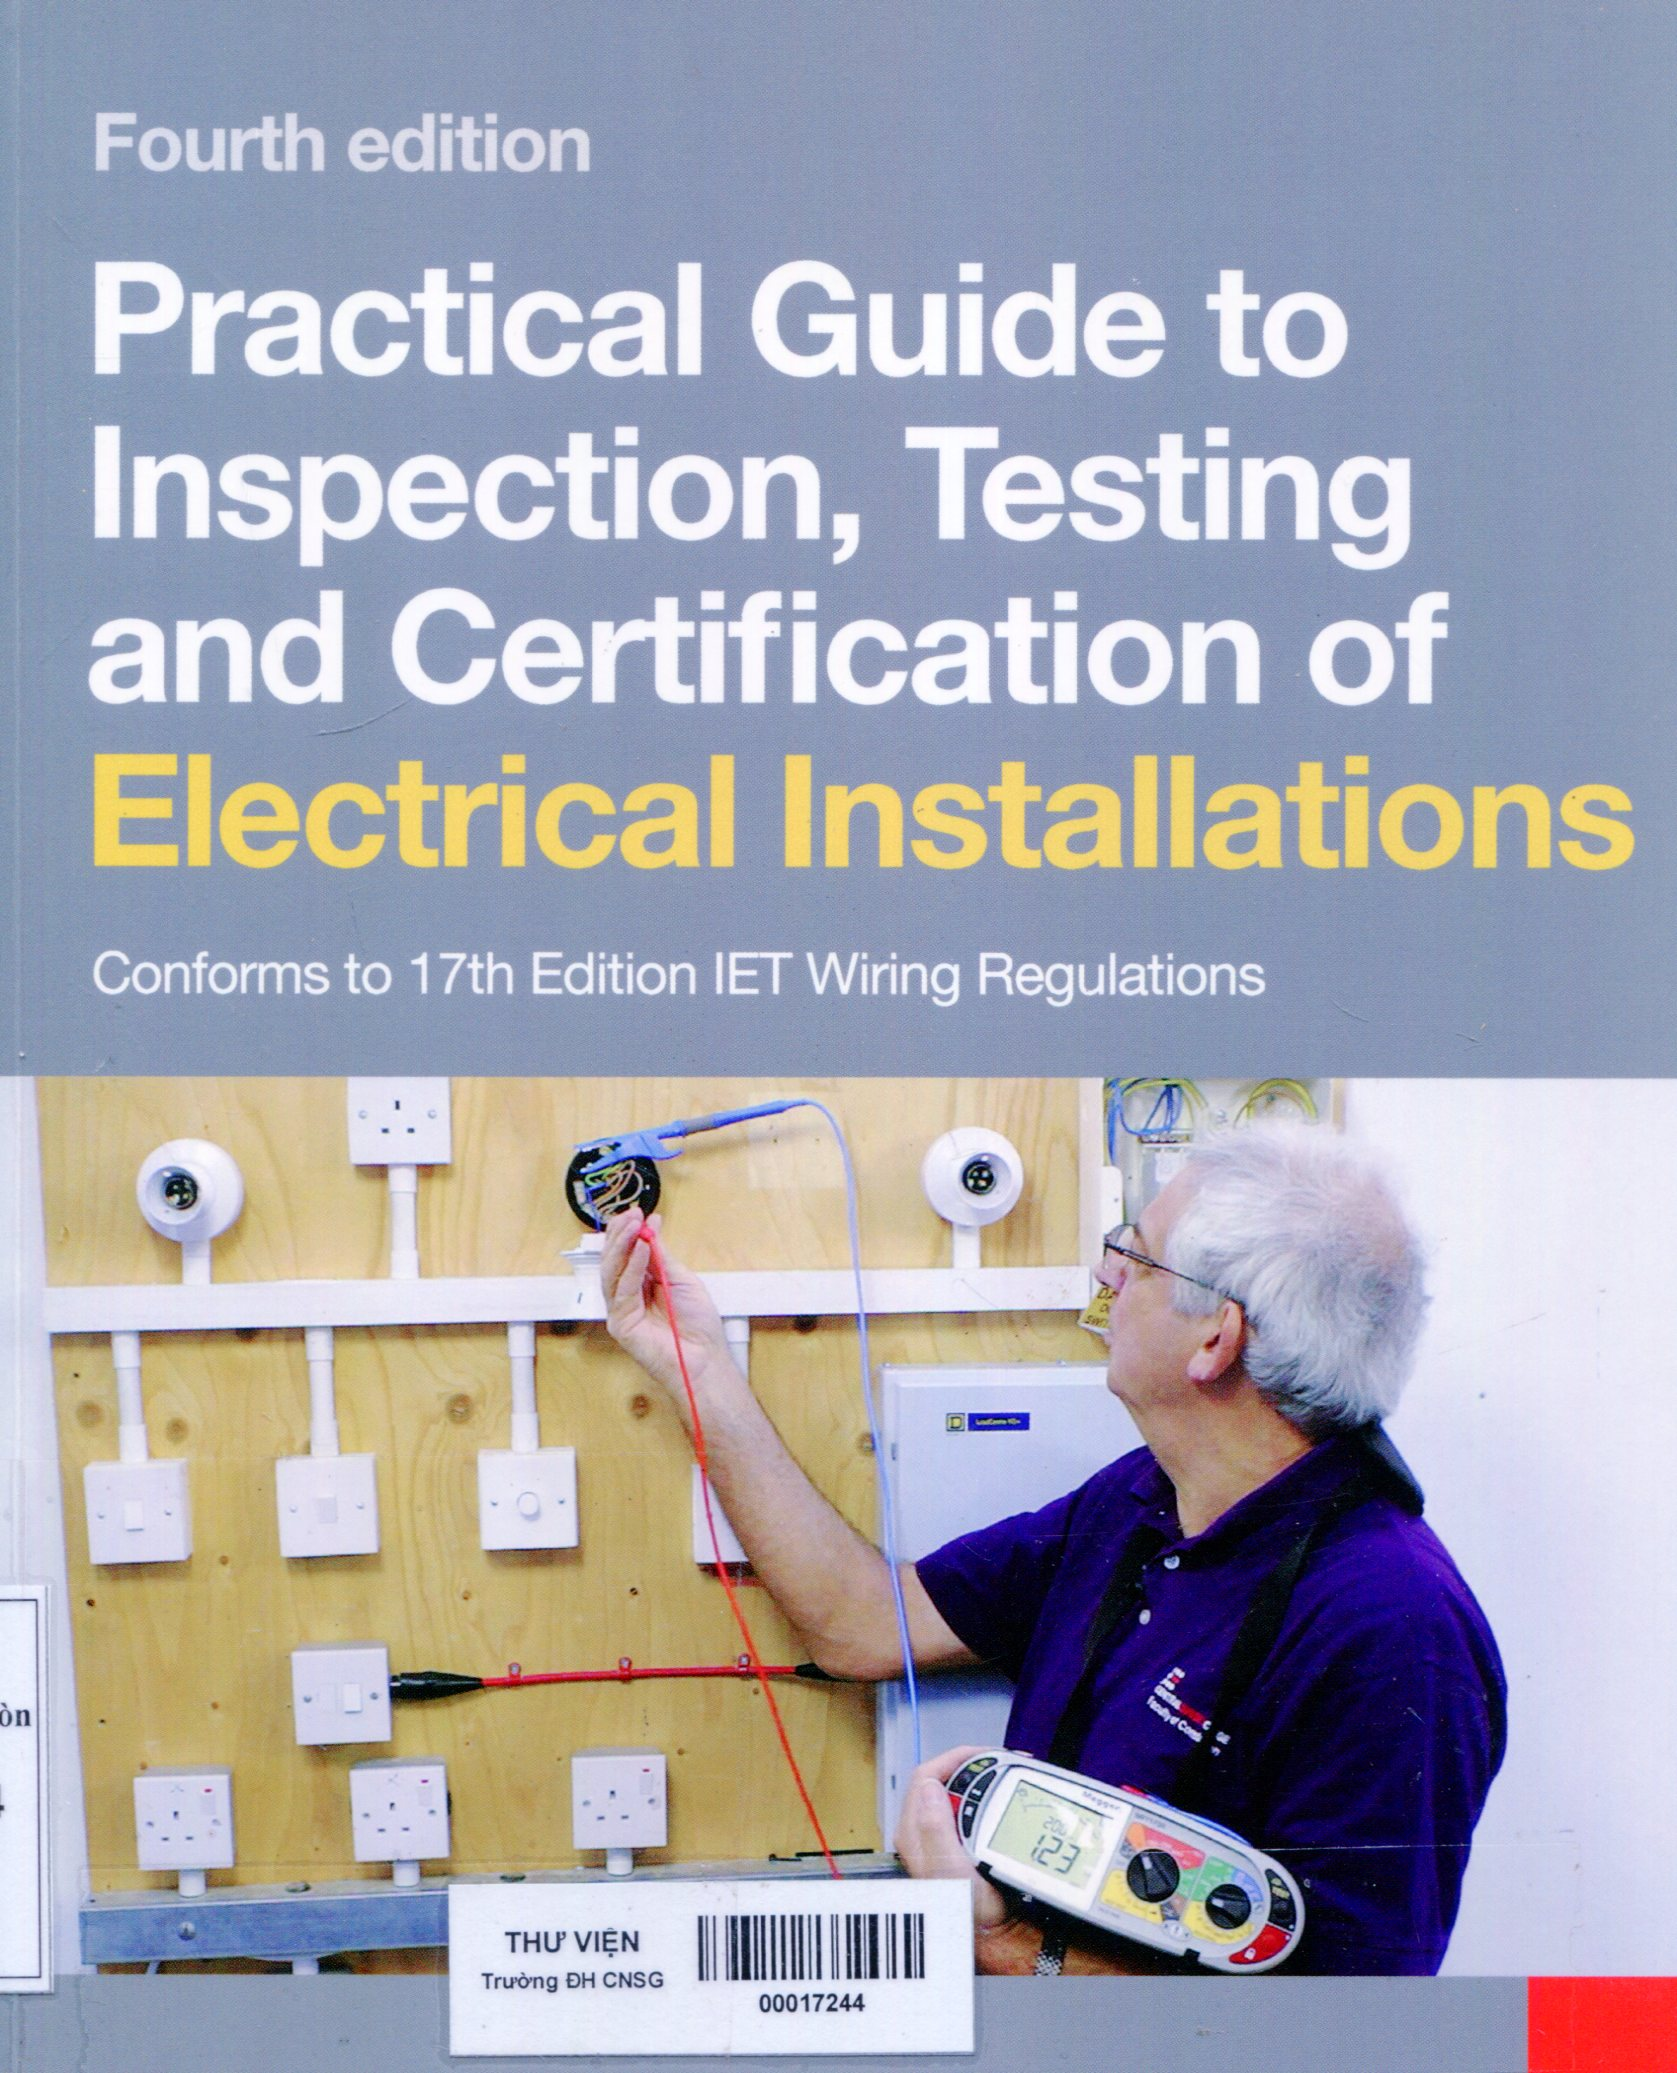 Practical guide to inspection, testing and certification of electrical installations